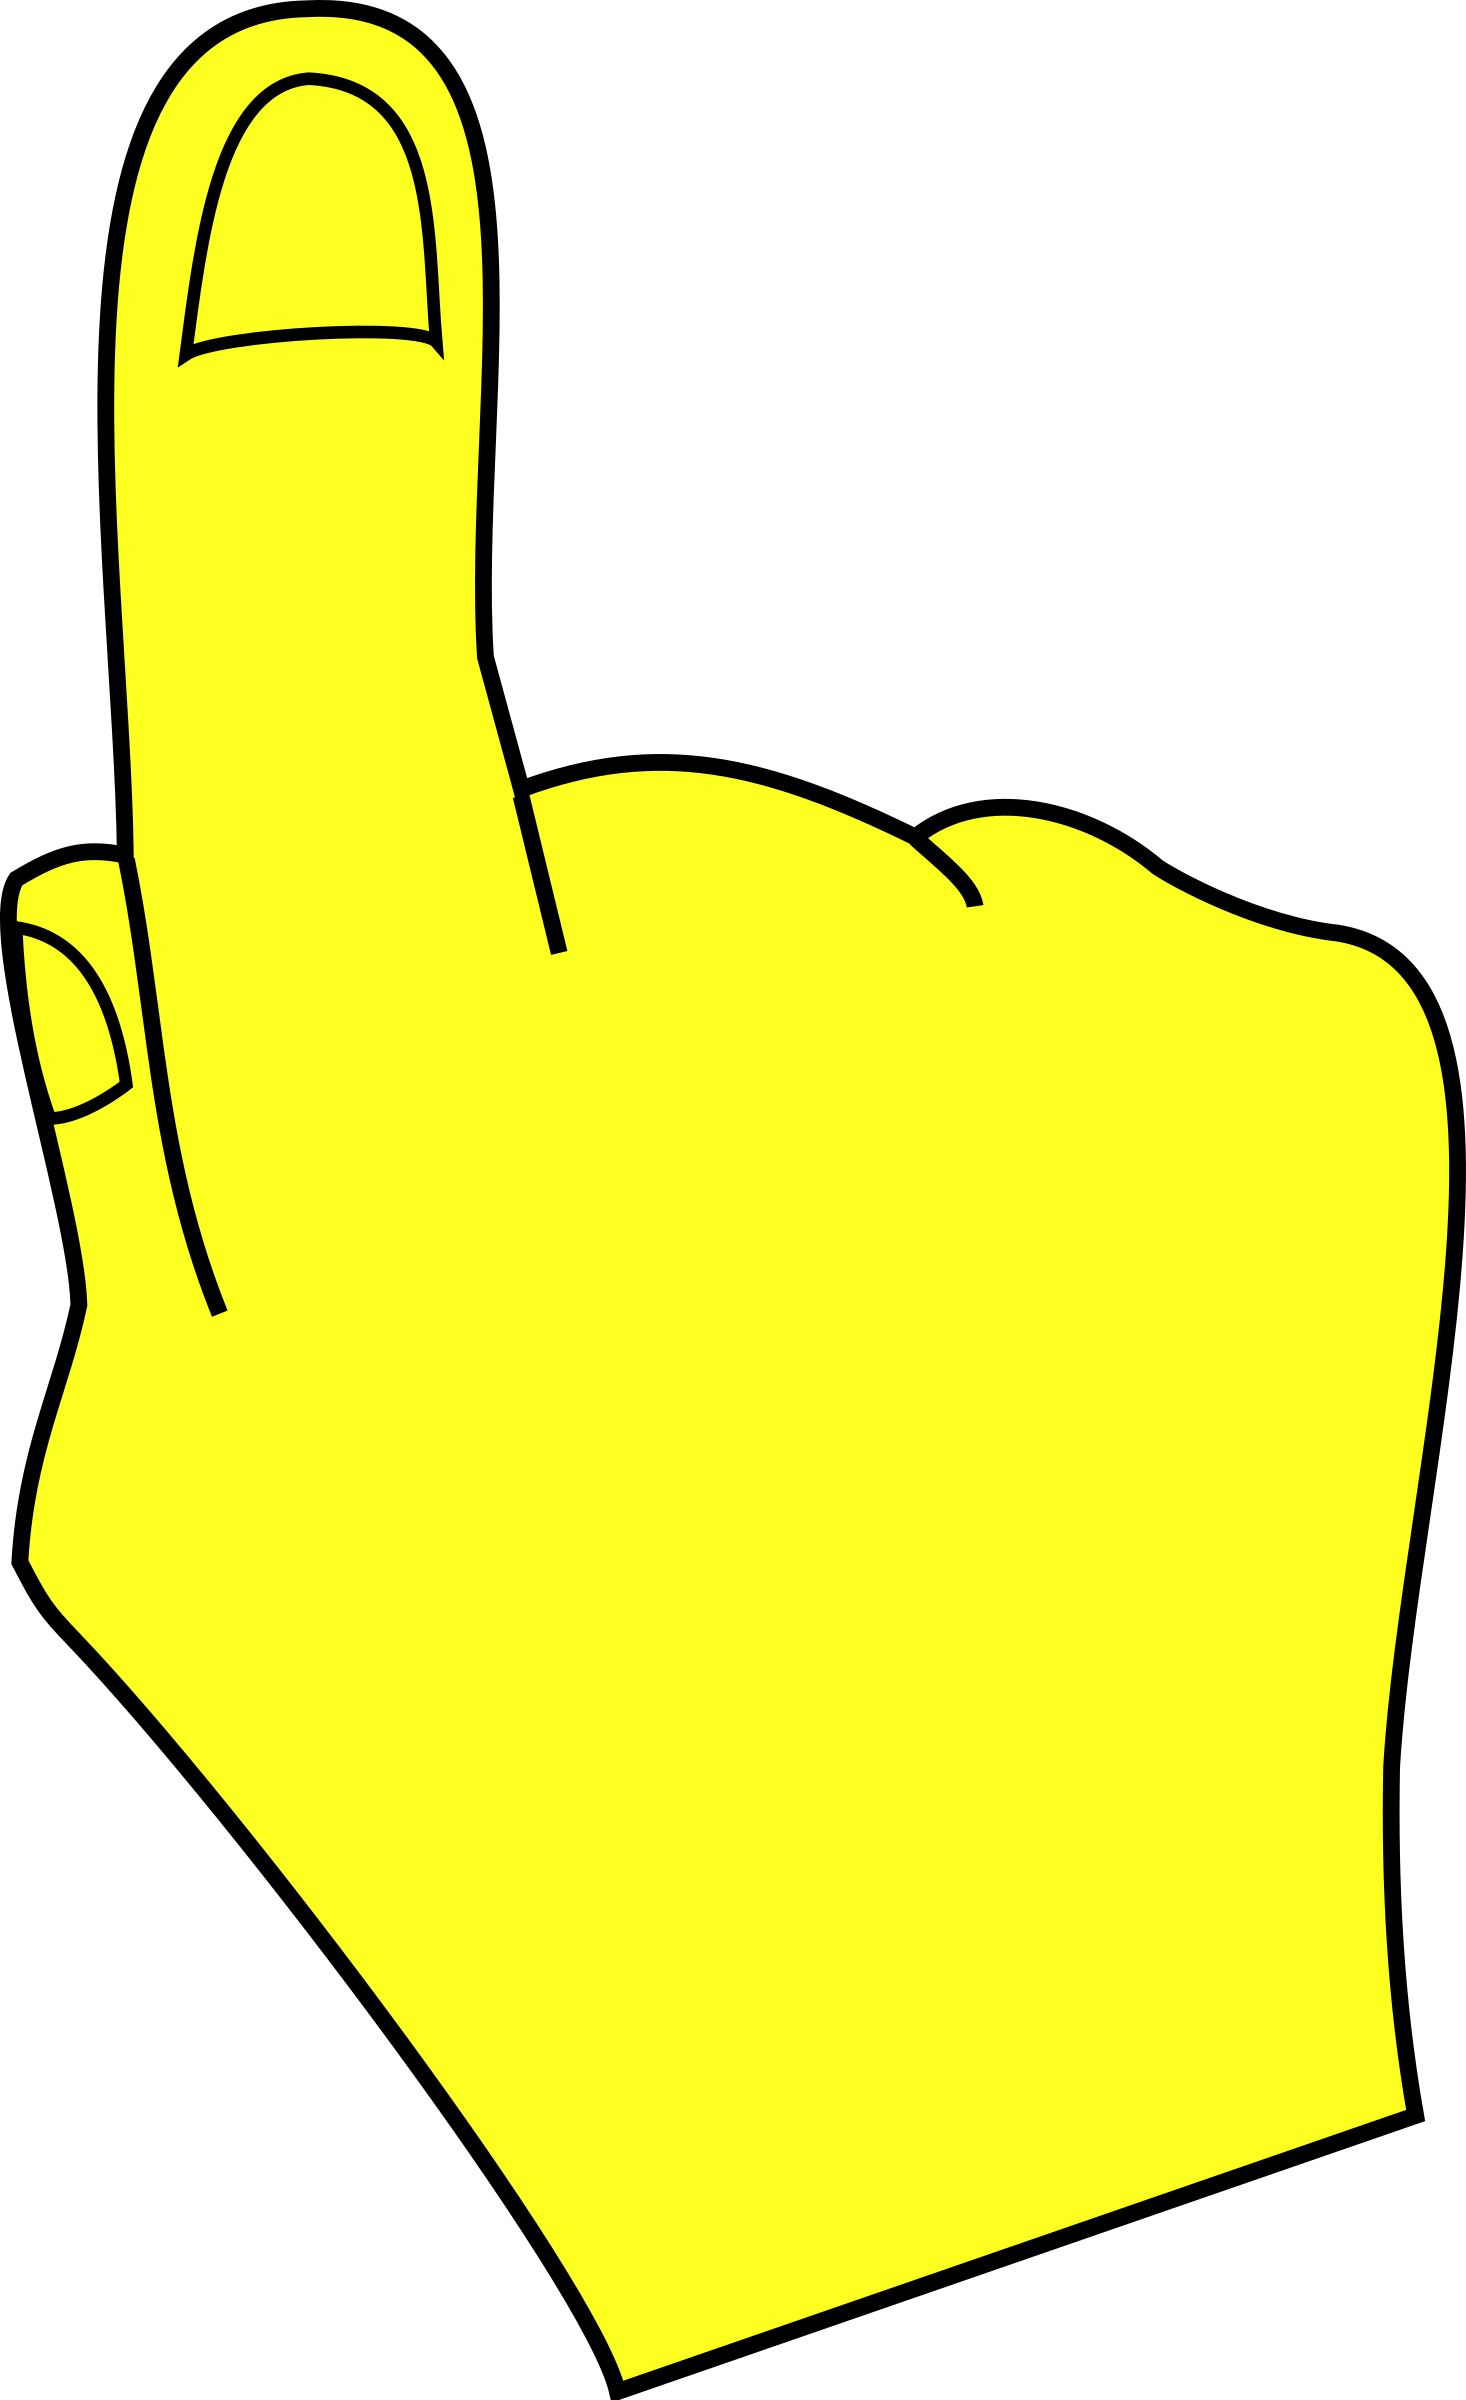 Onlinelabels Clip Art - Yellow Hand Pointing Up (1466x2400)